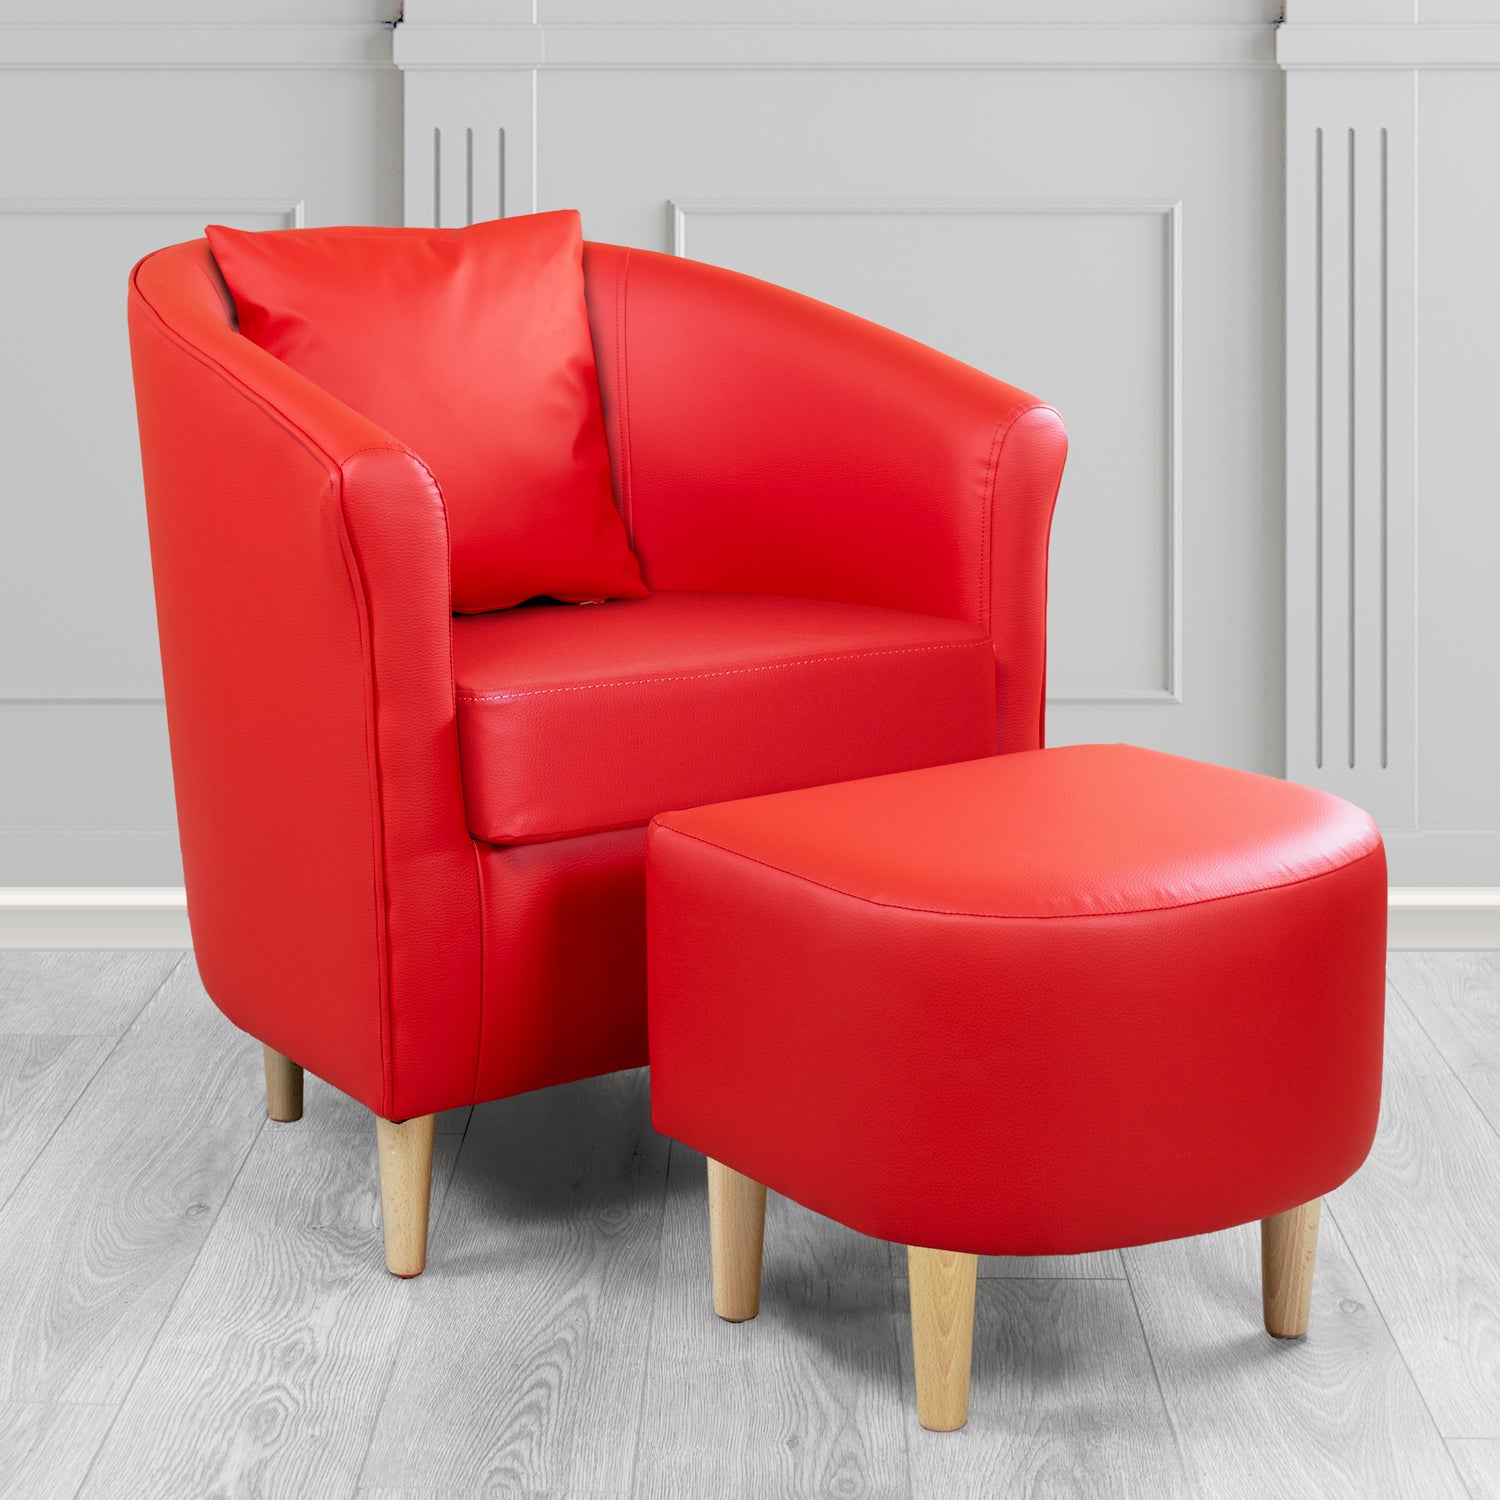 St Tropez Tub Chair with Footstool Set in Madrid Rouge Faux Leather - The Tub Chair Shop